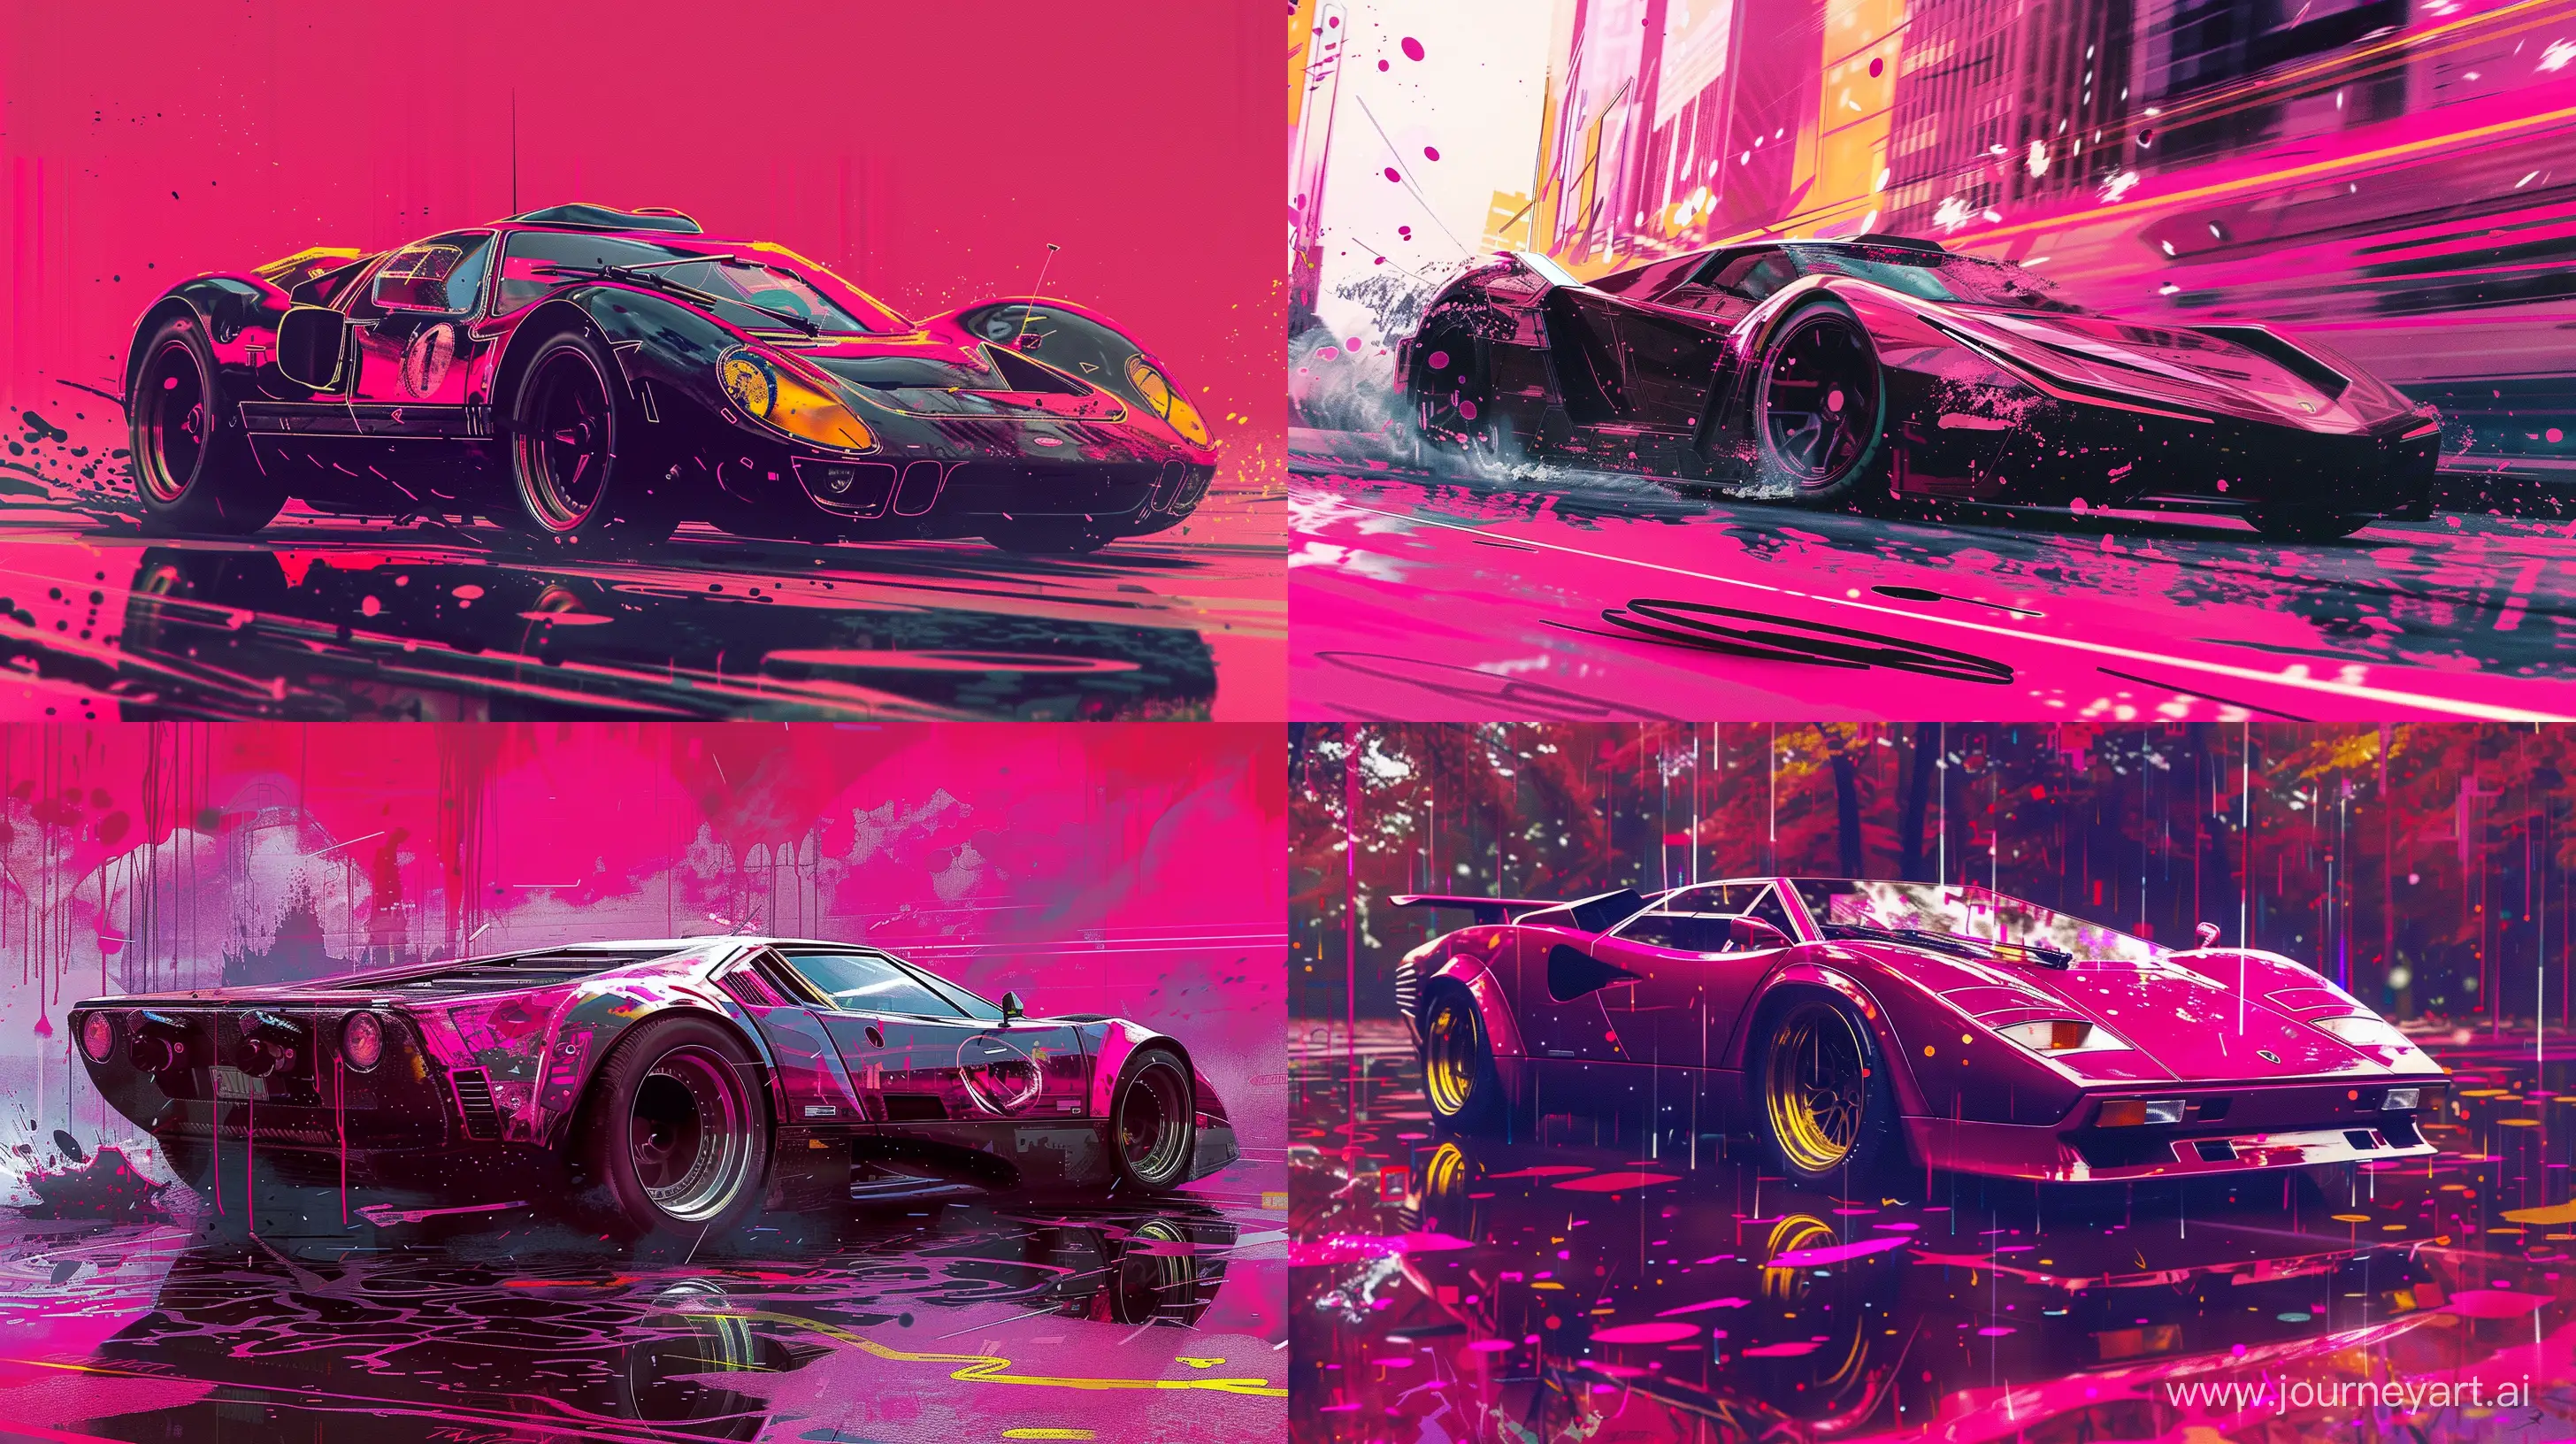 sportscar, in the style of retro-futuristic cyberpunk, crisp neo-pop illustrations, inkblots, i can't believe how beautiful this is, rich and immersive, brutalism, magenta and amber --ar 16:9 